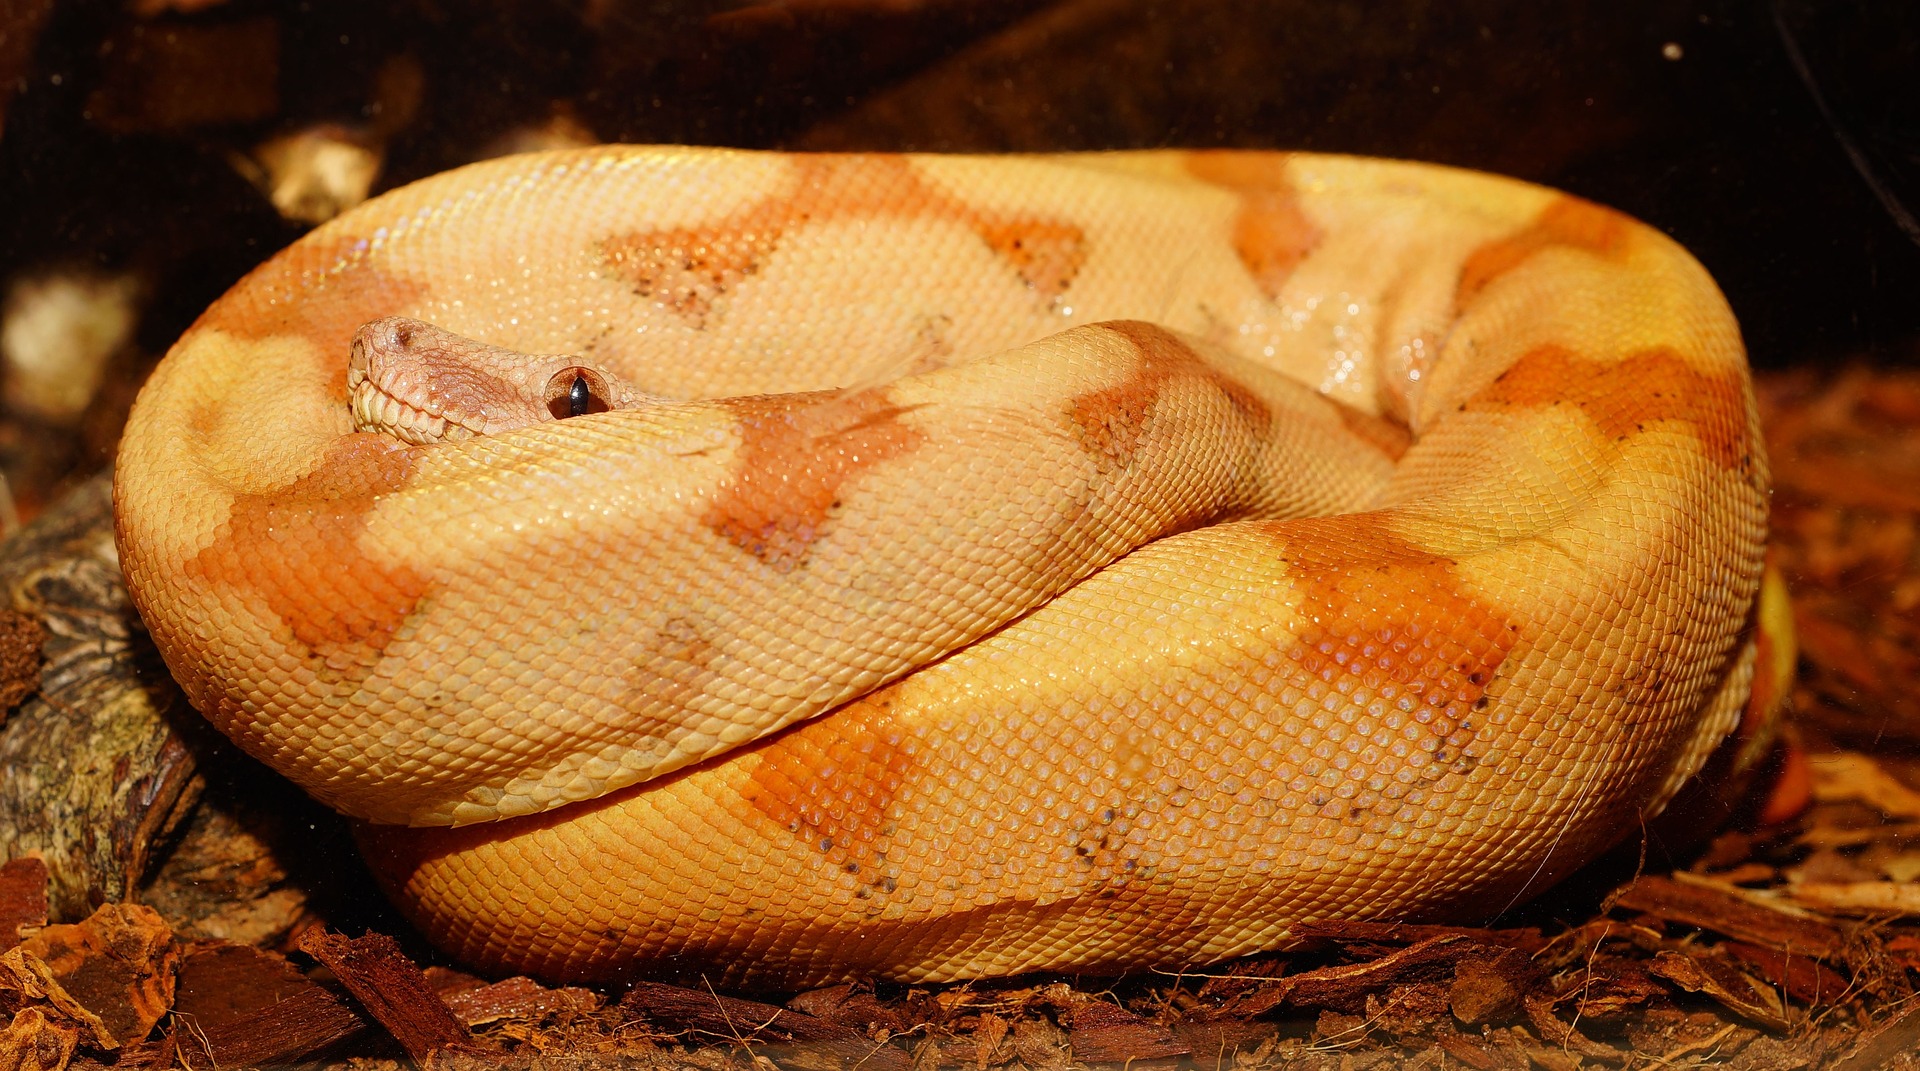 Boa constrictor is just one of the snakes that has found its way to Hawaii.